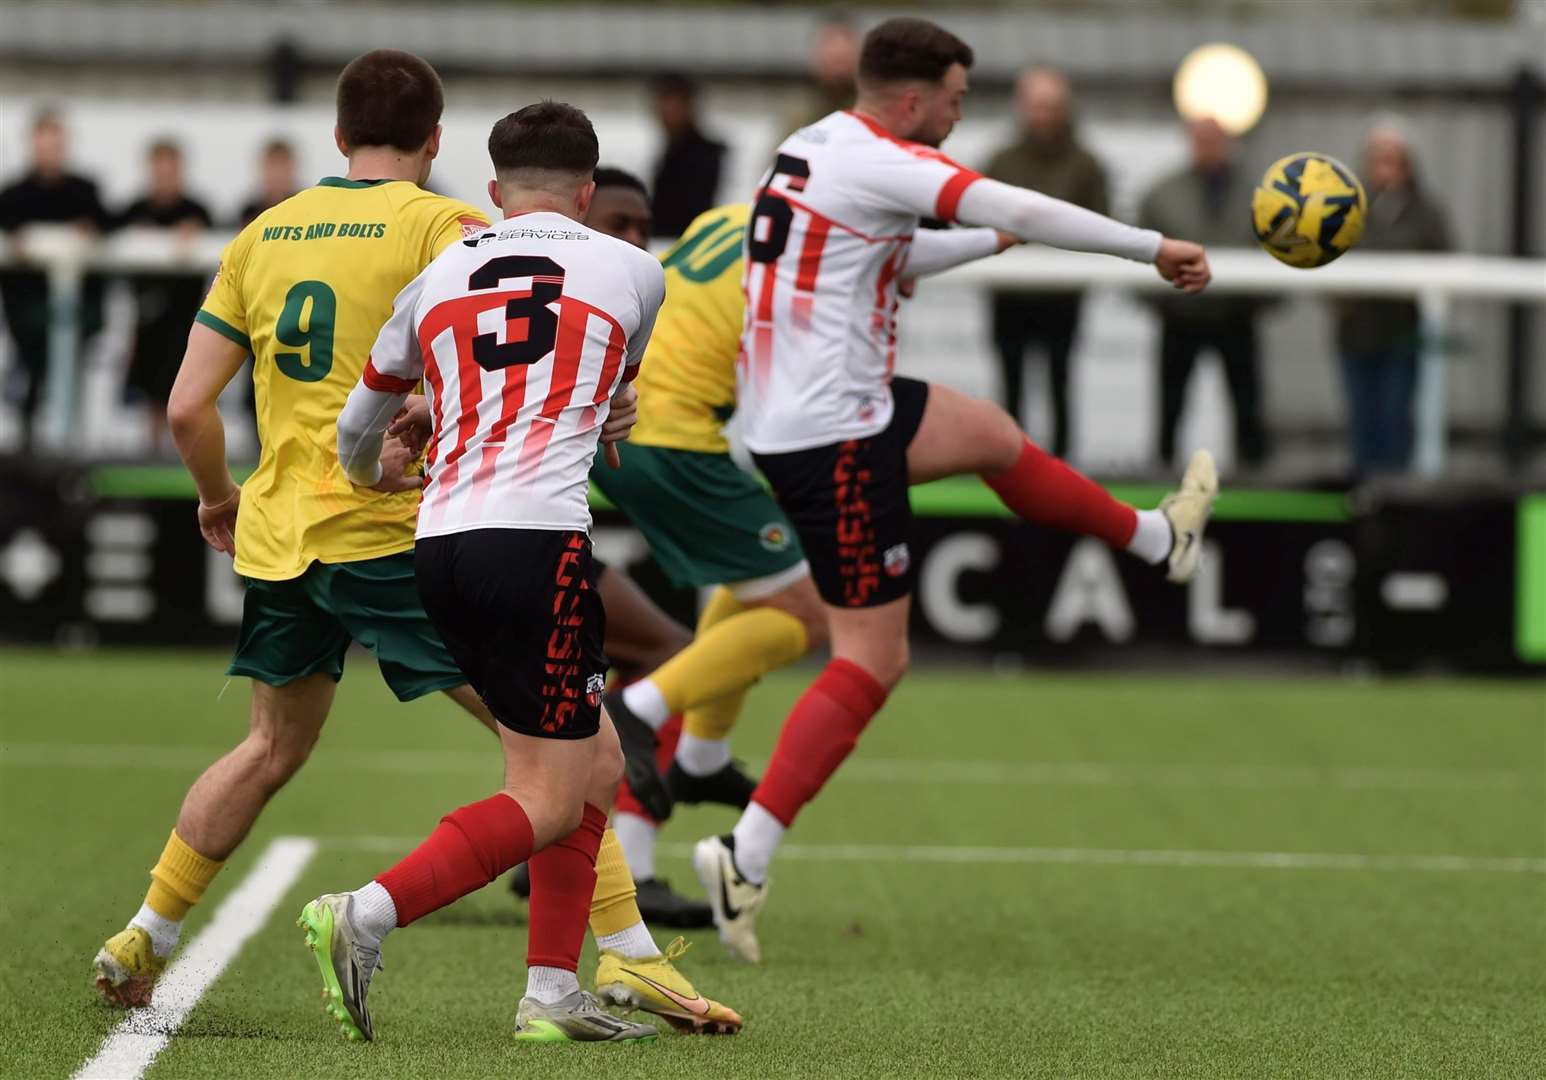 Ian Draycott equalises for Ashford at Sheppey on Saturday. Picture: Ian Scammell